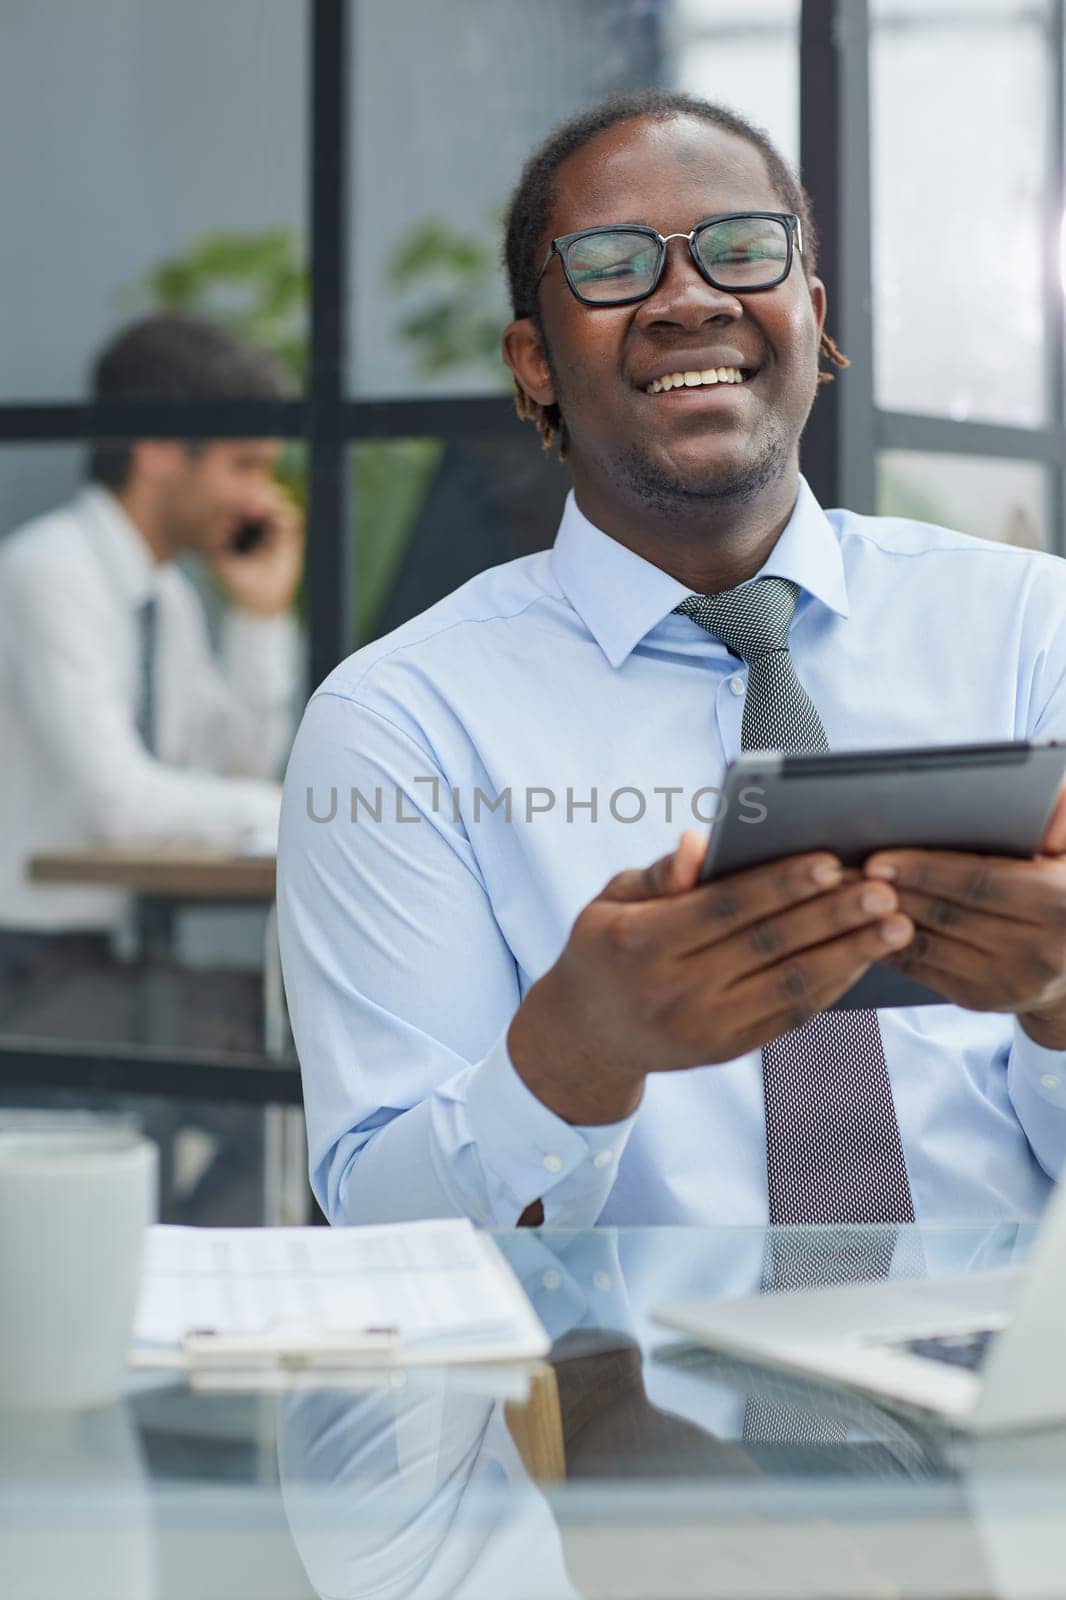 a man at a workplace at a table in front of a computer uses a tablet by Prosto